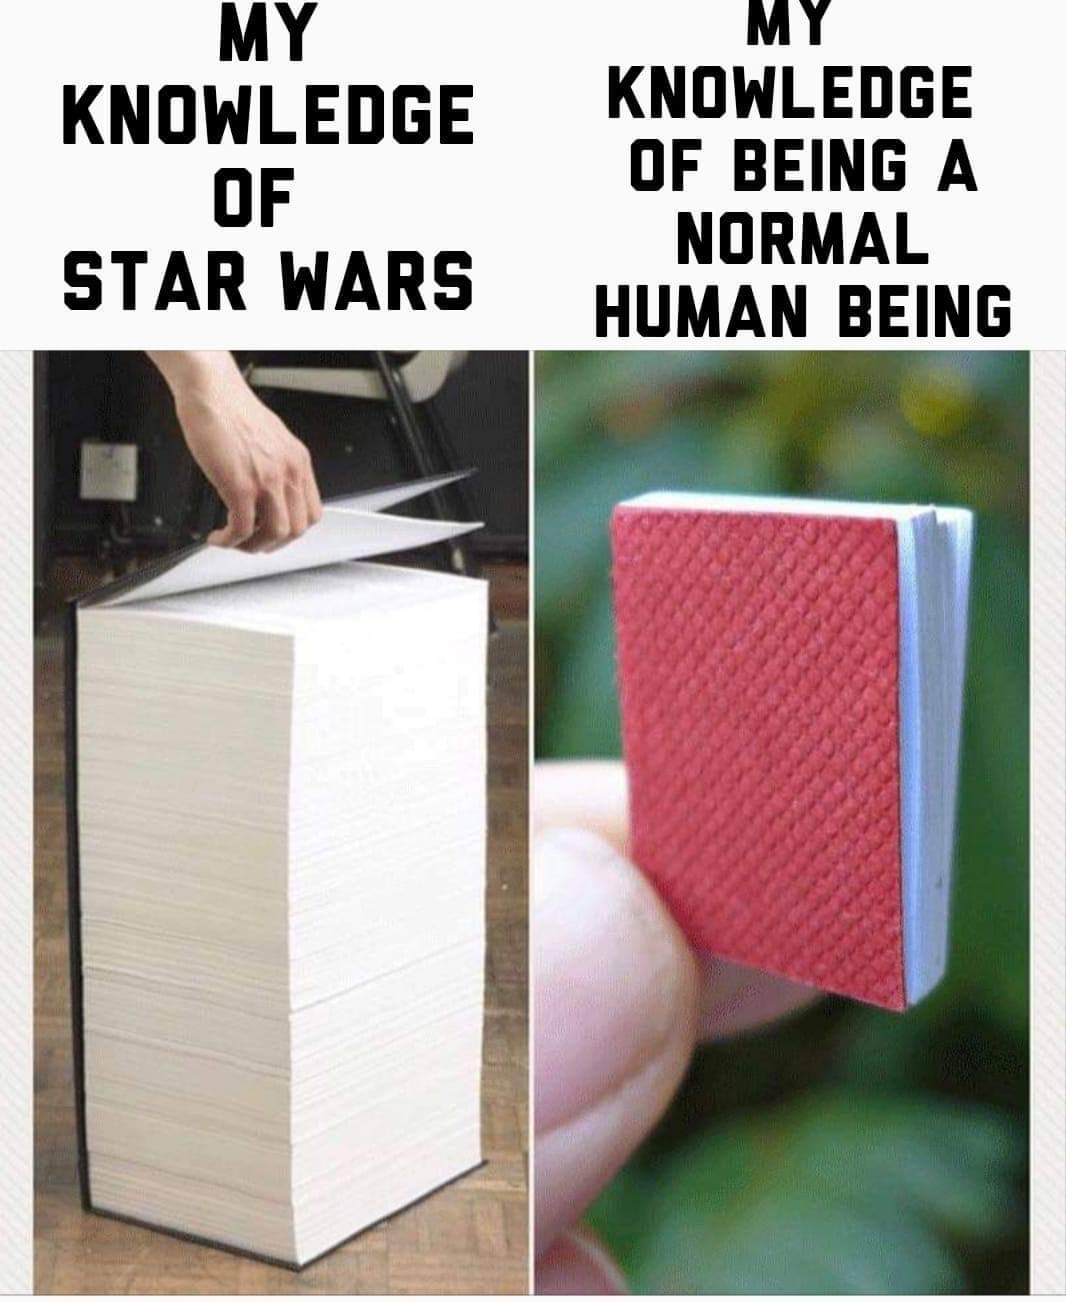 58 Star Wars Episode IX Memes and Many More